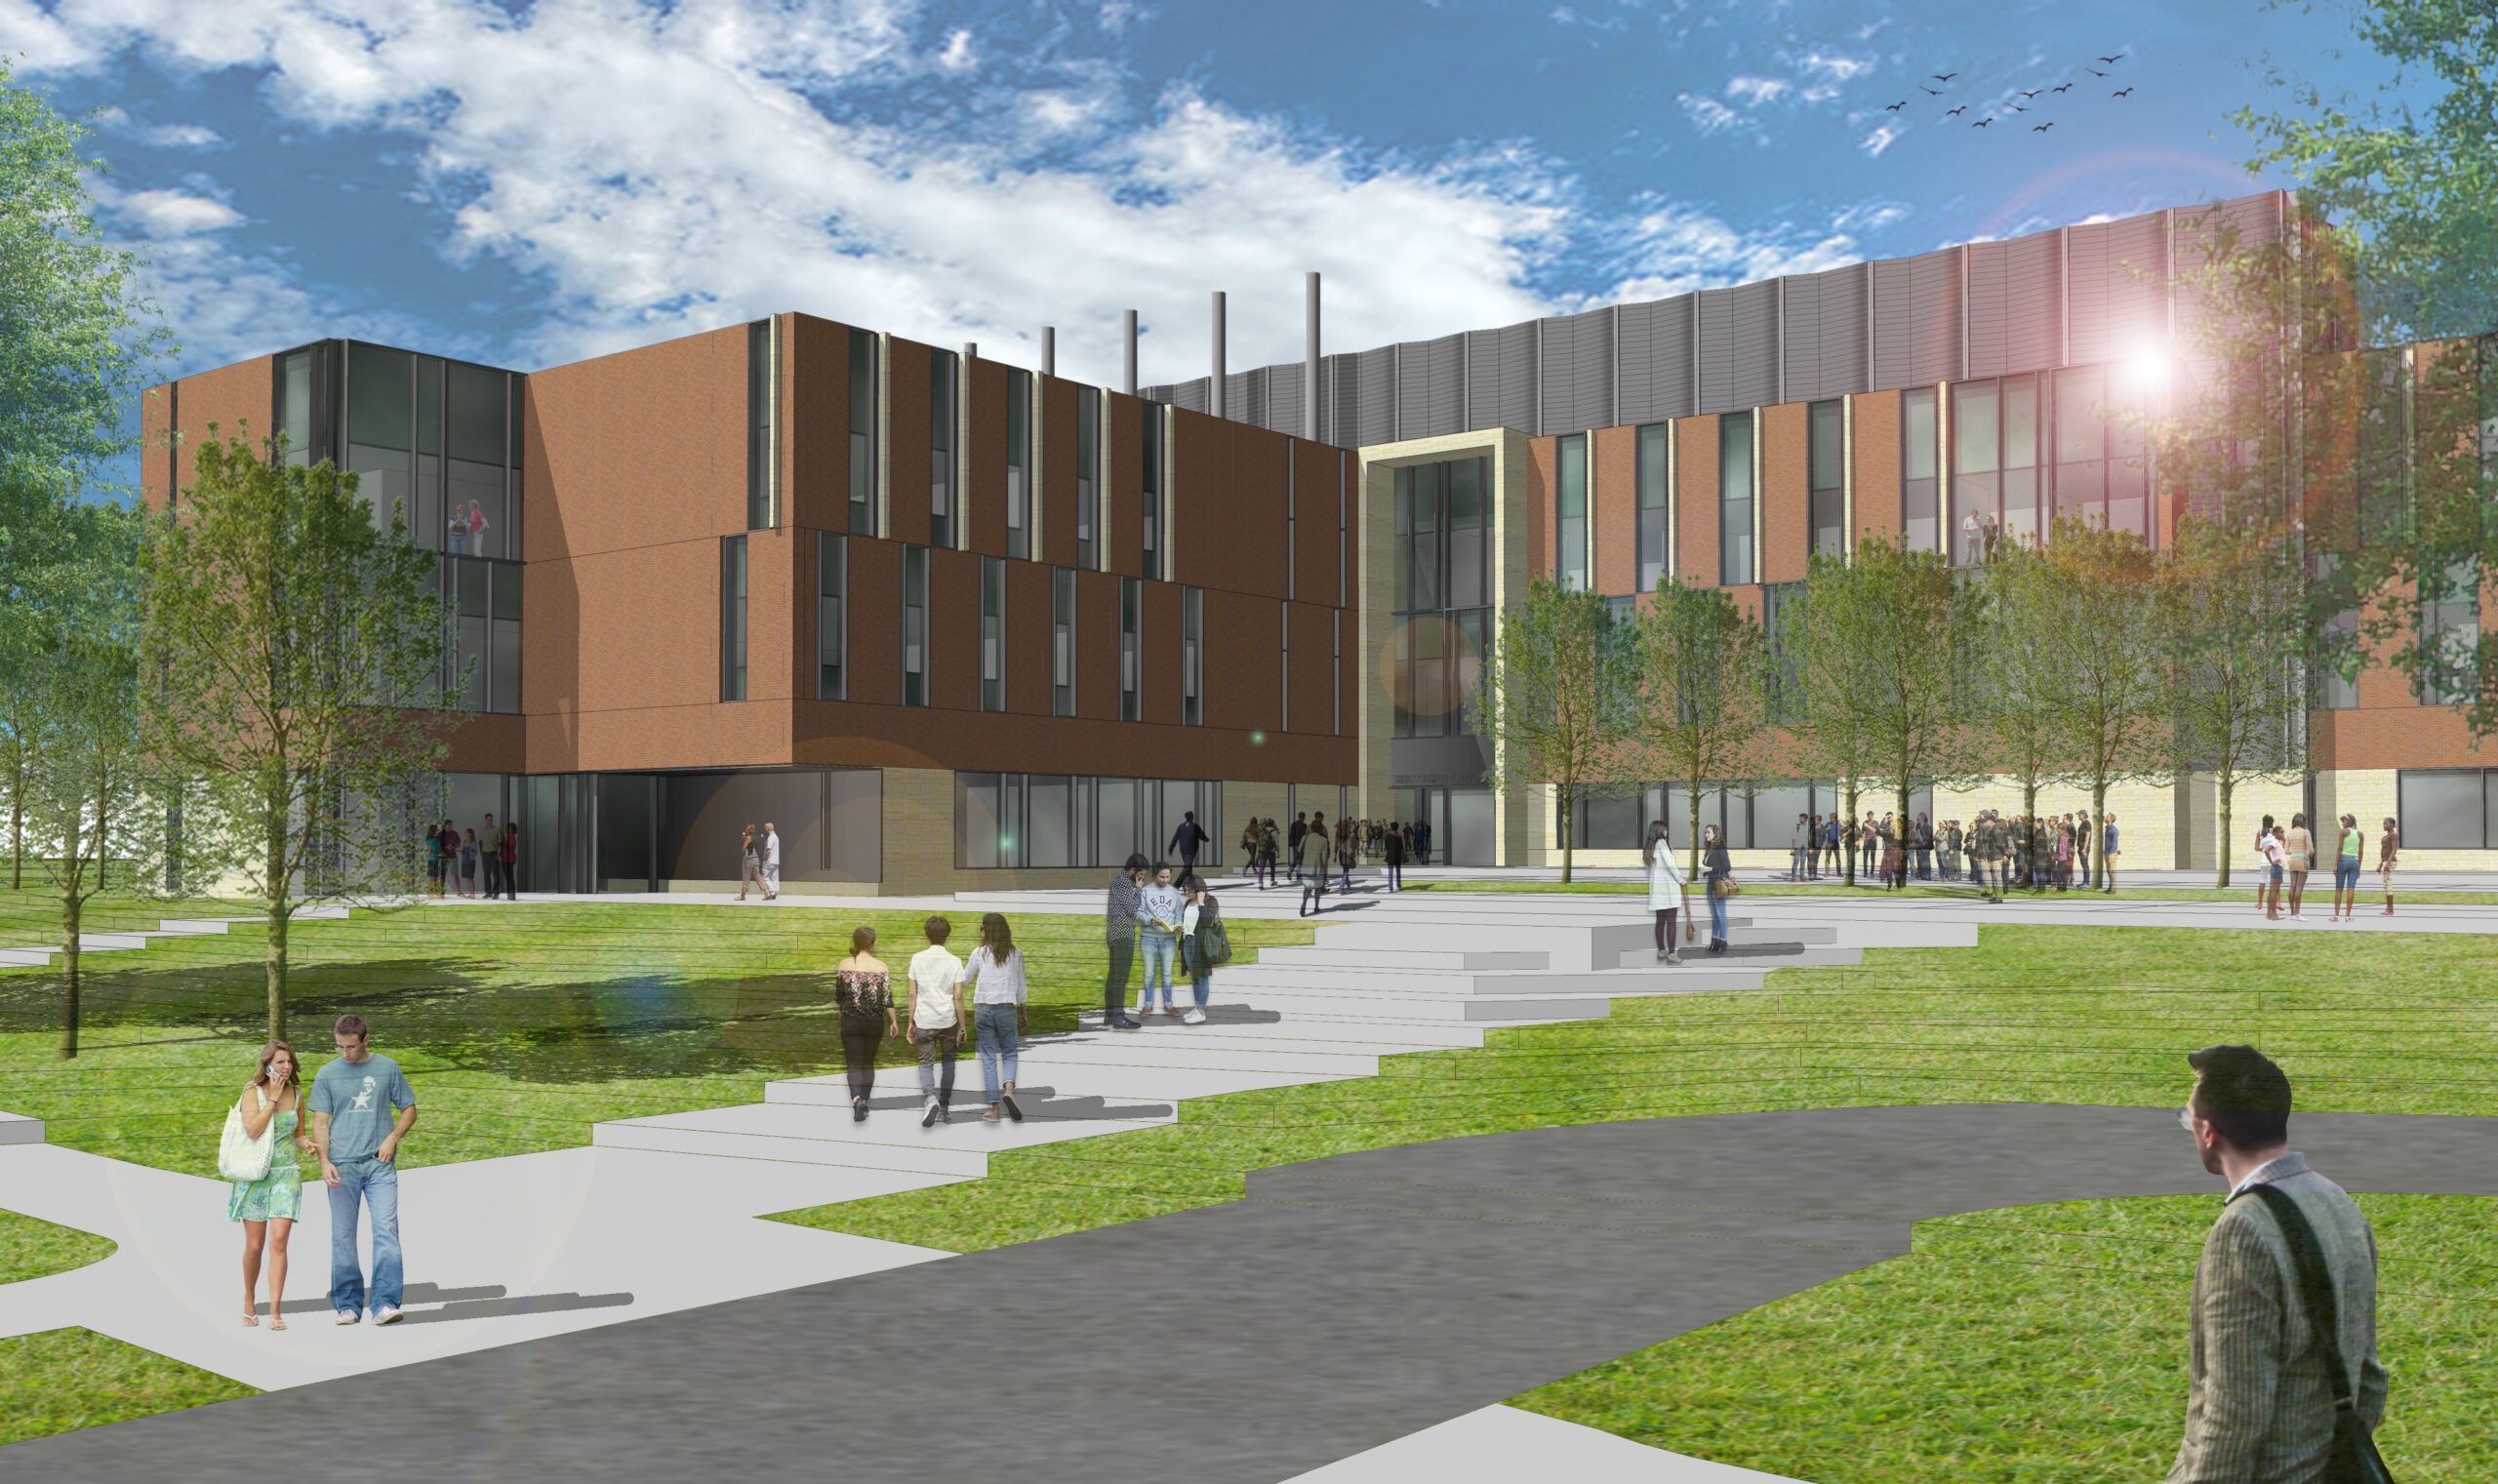 An artists rendering of the proposed Science and Technology Innovation Center at UW-River Falls